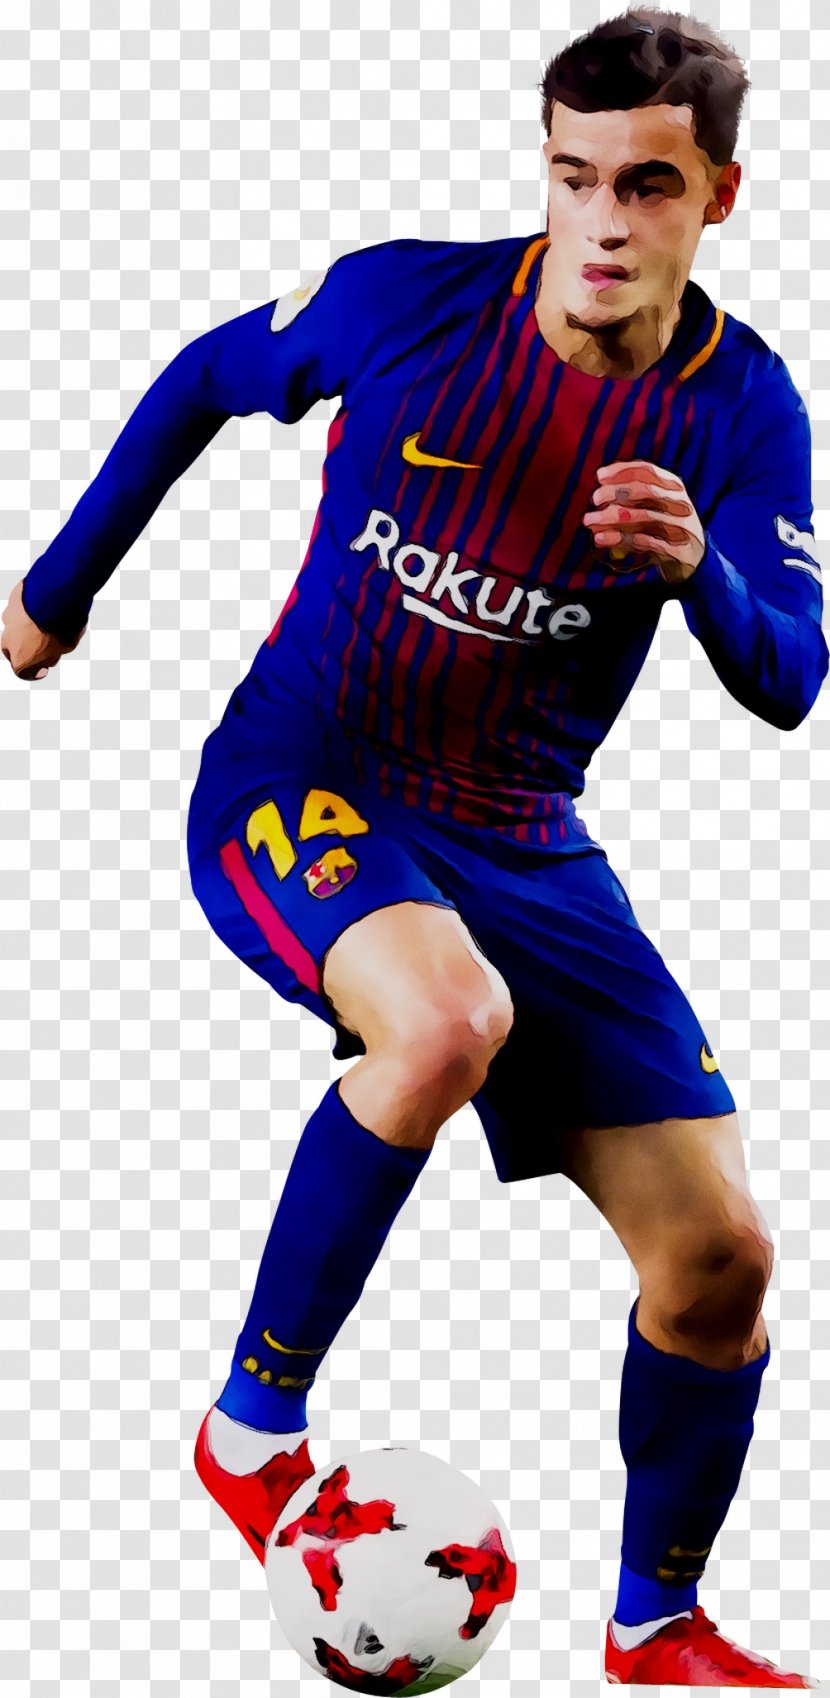 Philippe Coutinho FC Barcelona Liverpool F.C. Image - Soccer Player - Sports Gear Transparent PNG